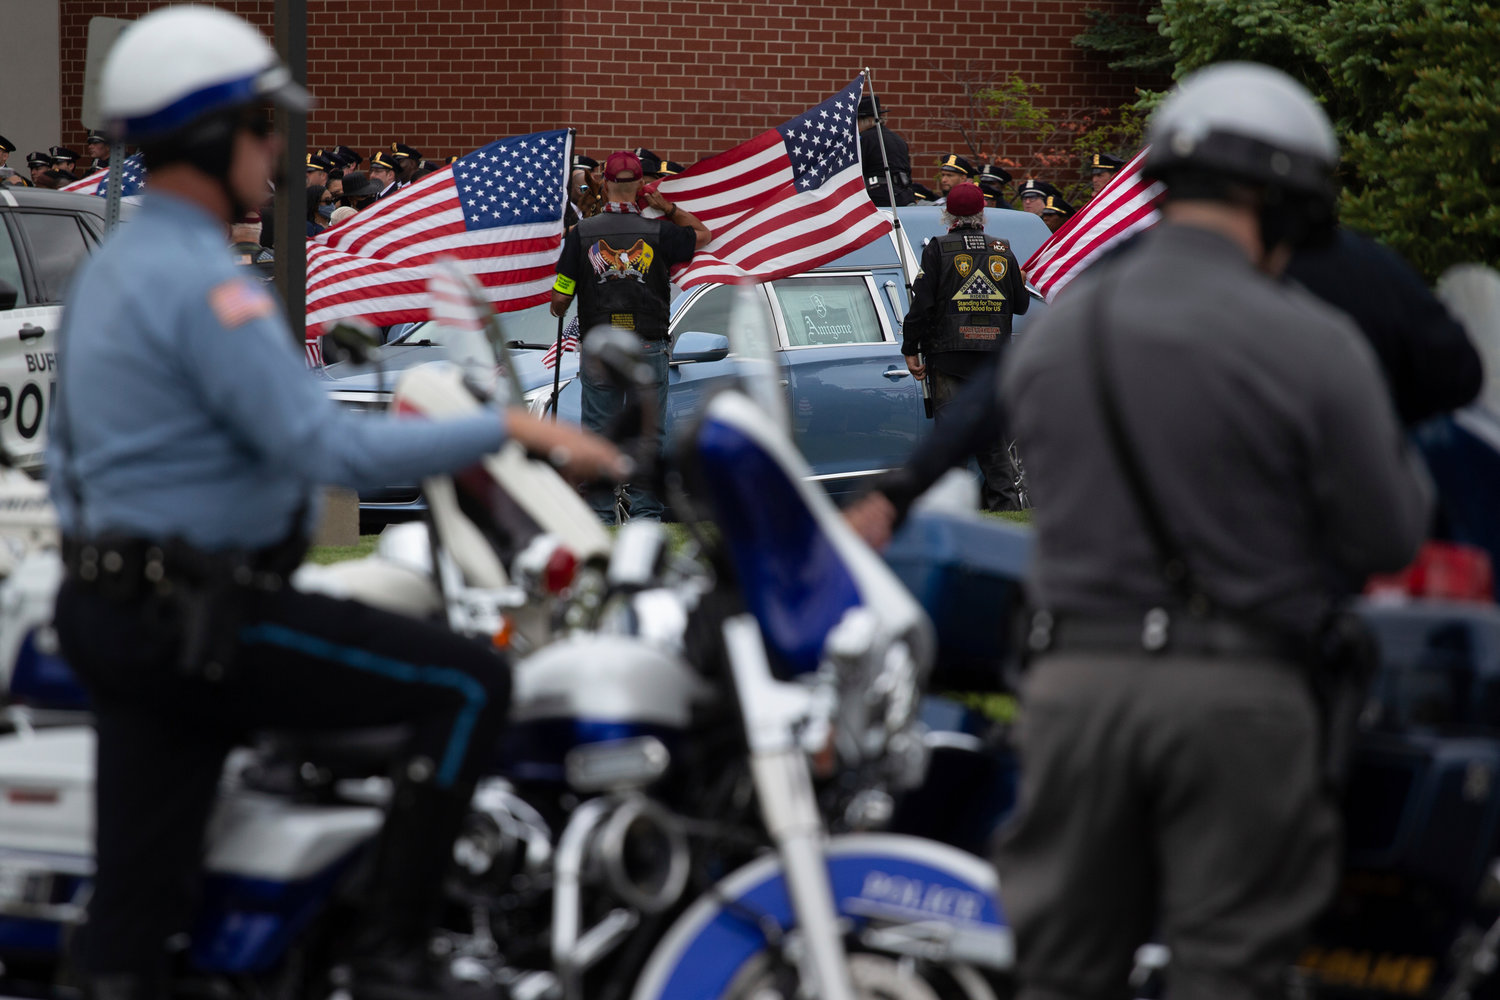 People salute during the funeral service for Aaron Salter Jr. at The Chapel on Crosspoint on Wednesday, May 25, 2022, in Getzville, N.Y. Salter Jr. was killed in the Buffalo supermarket shooting on May 14. (AP Photo/Joshua Bessex)